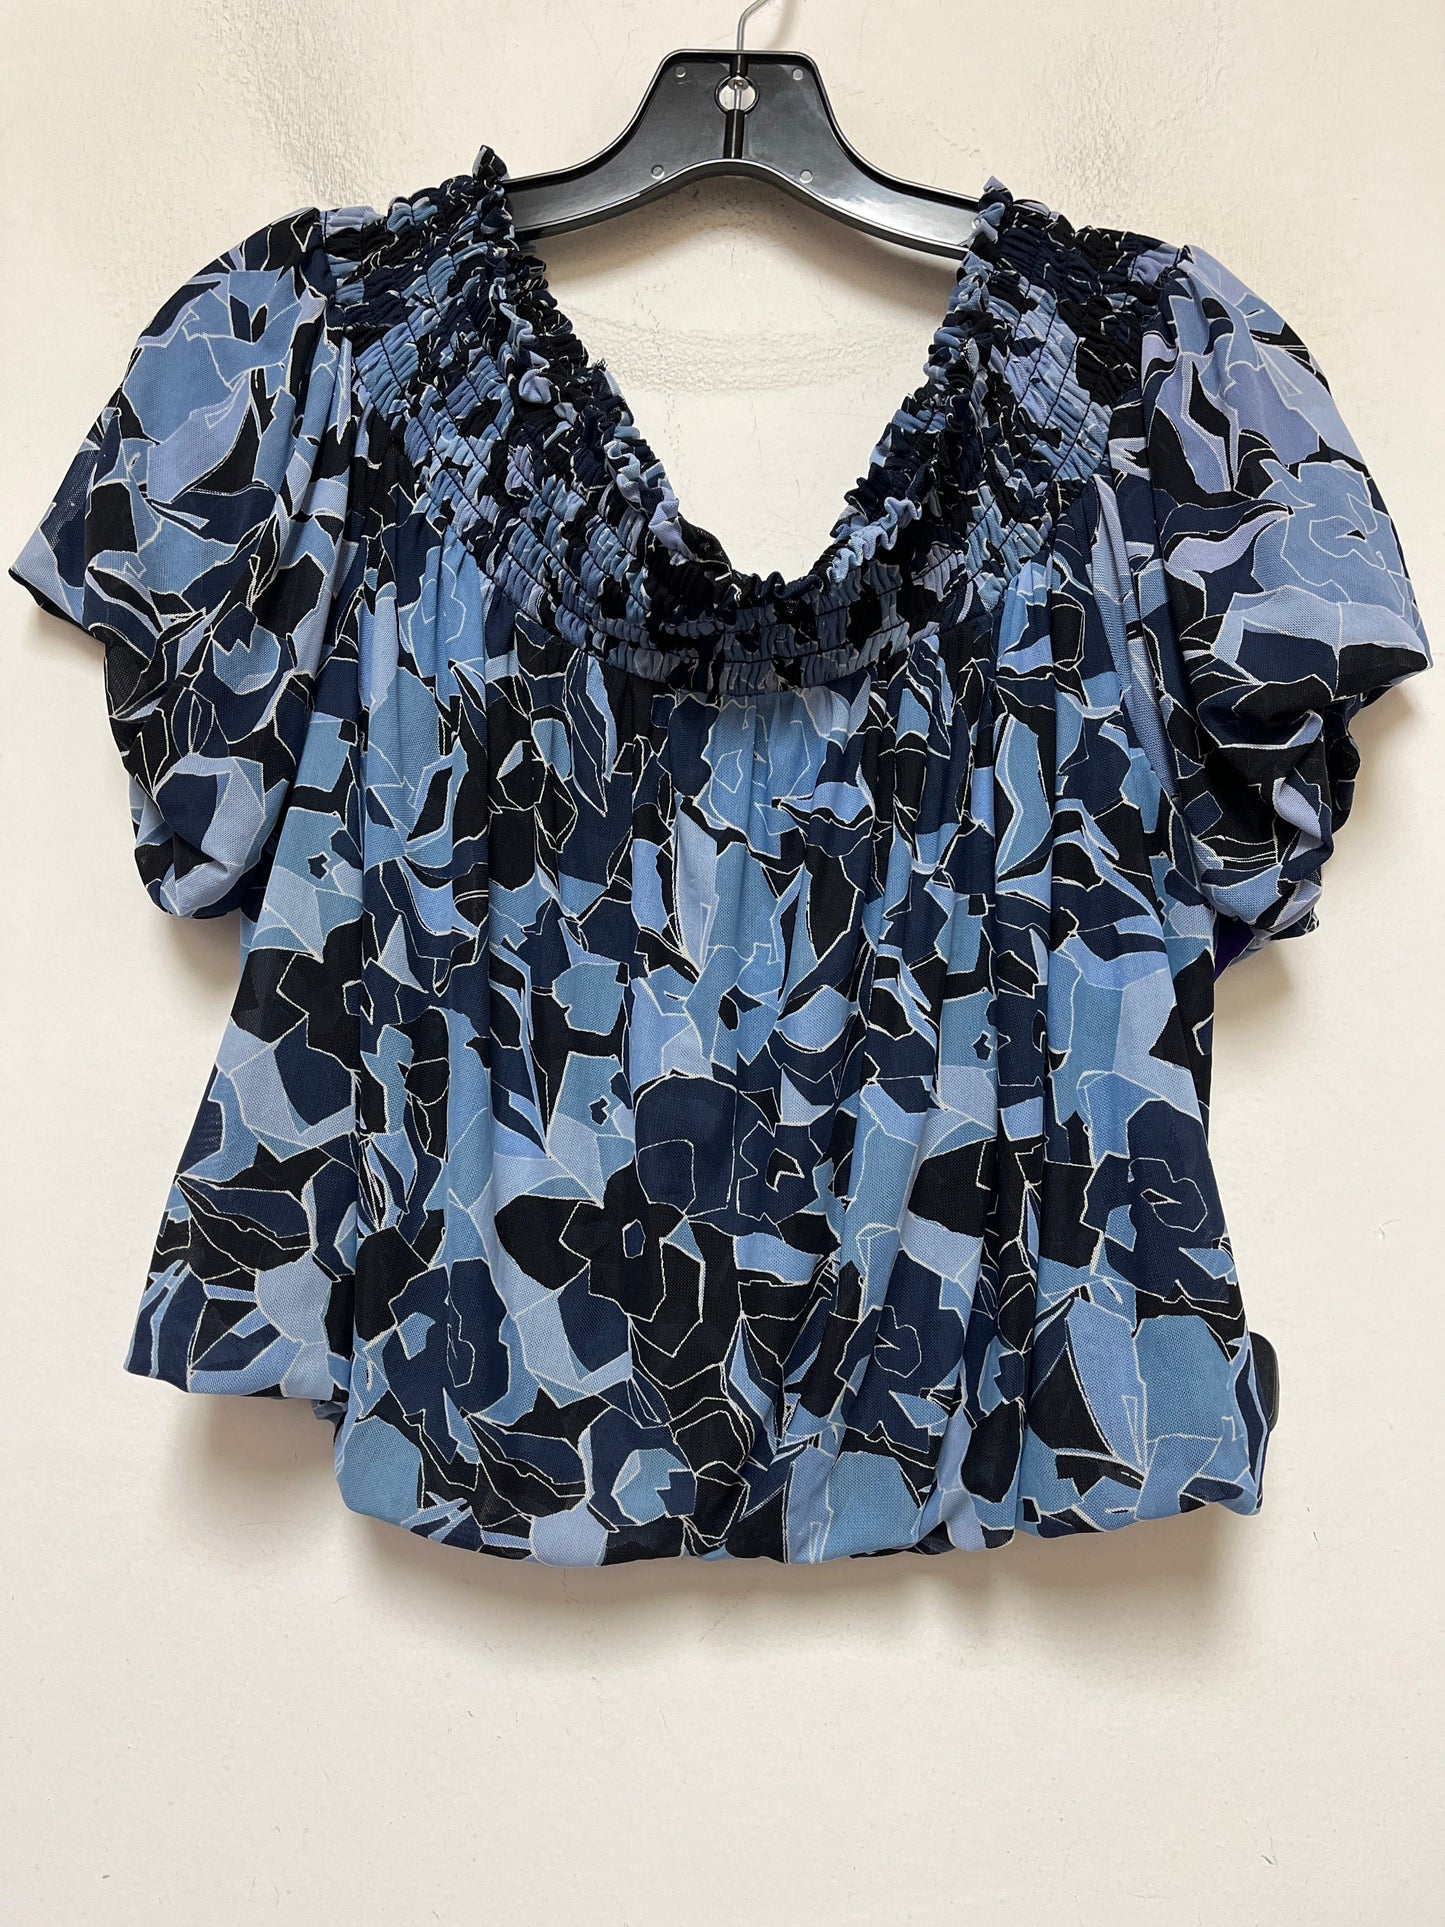 Blue Top Short Sleeve Free People, Size M